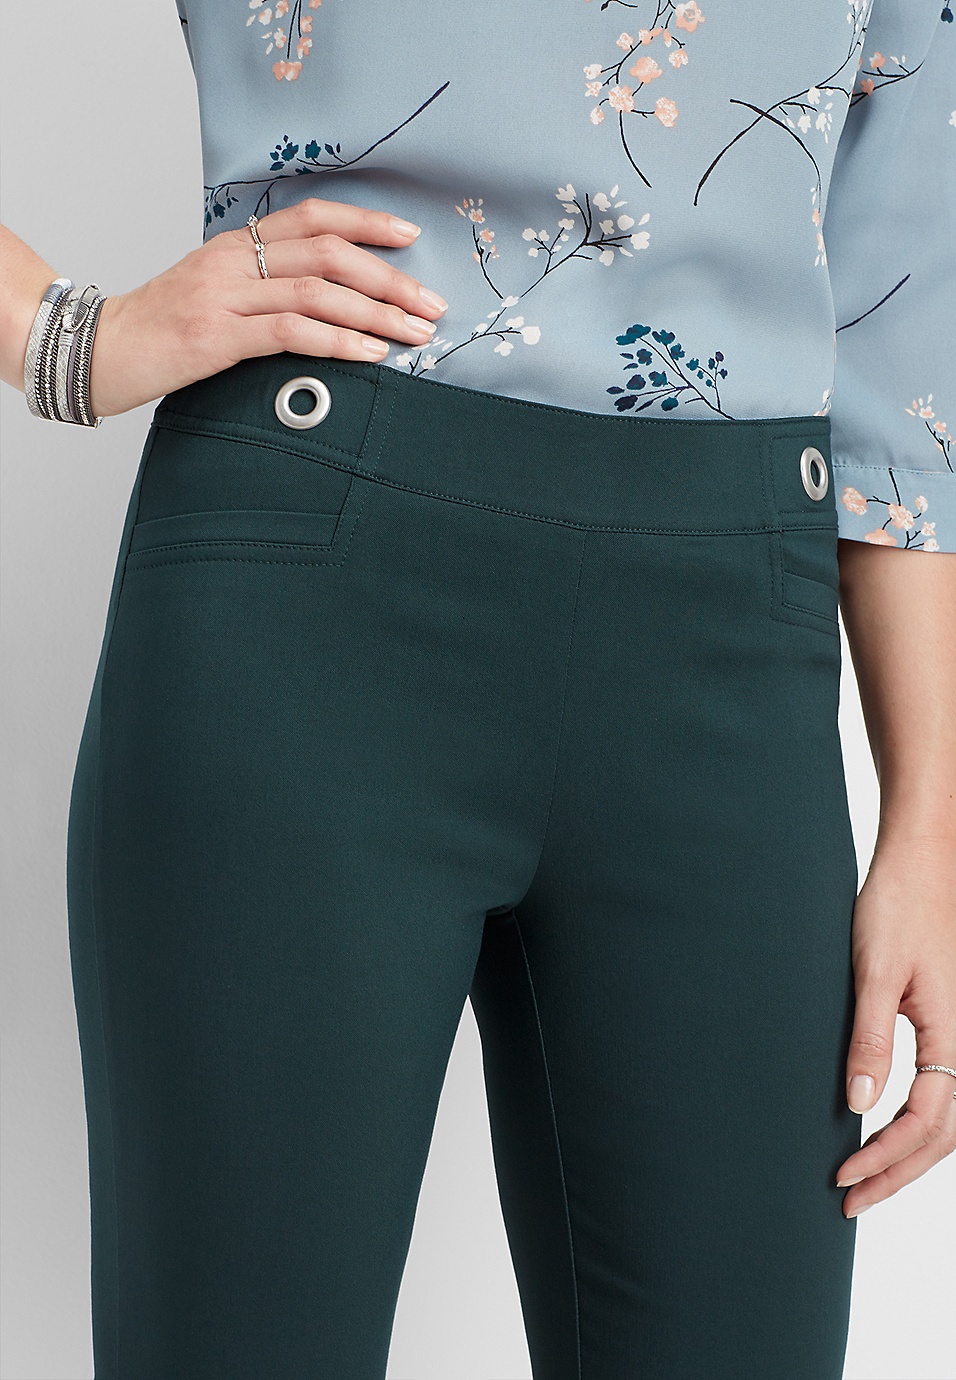 teal stretch pull on grommet skinny ankle pant